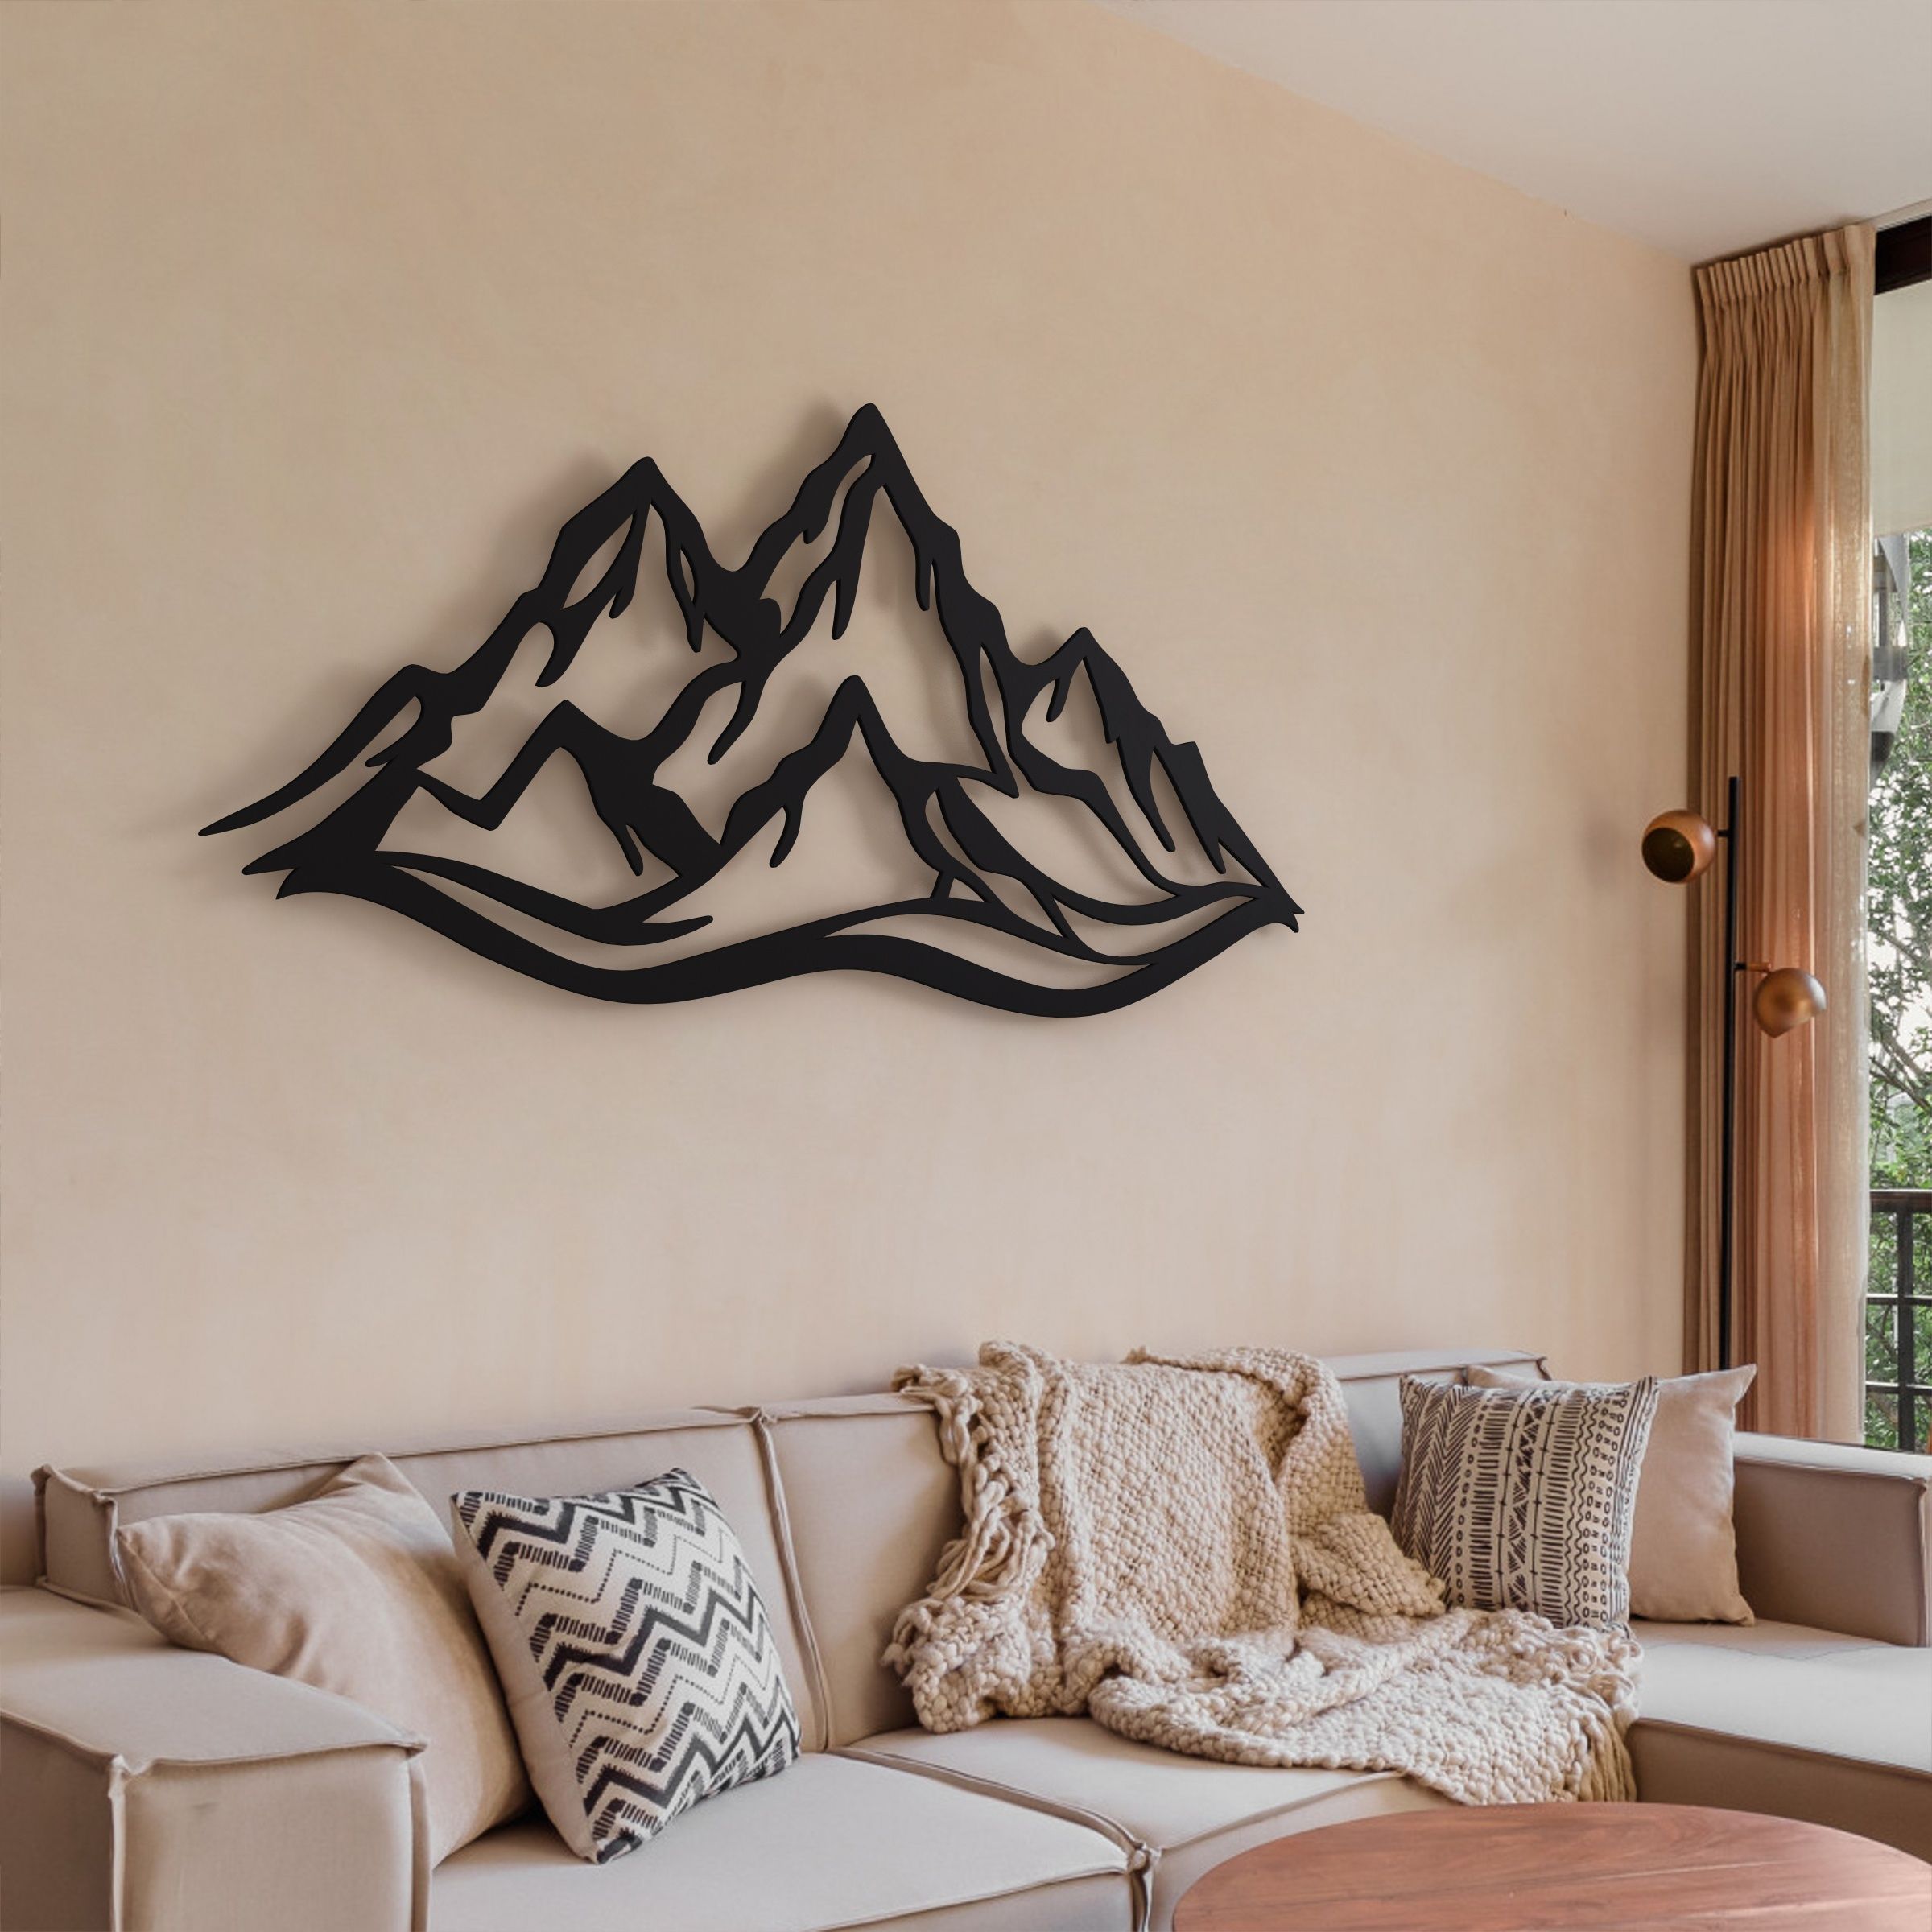 Mountain Wall Decor – Wood Art Panel For Home Within Latest Mountains Wall Art (View 8 of 20)